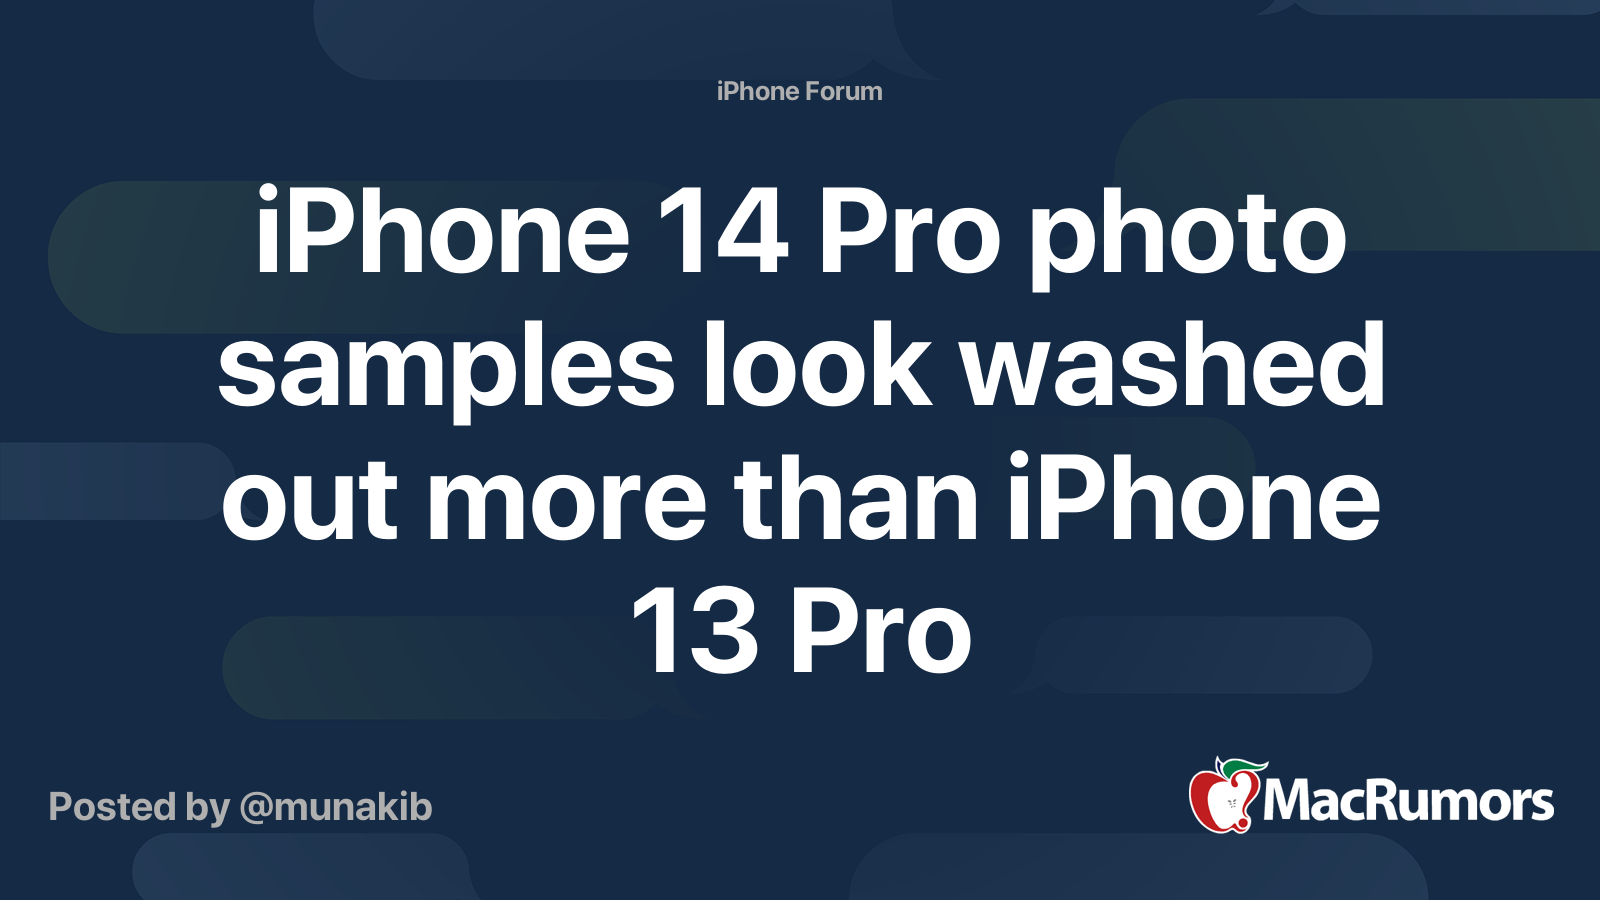 iPhone 14 Pro photo samples look washed out more than iPhone 13 Pro